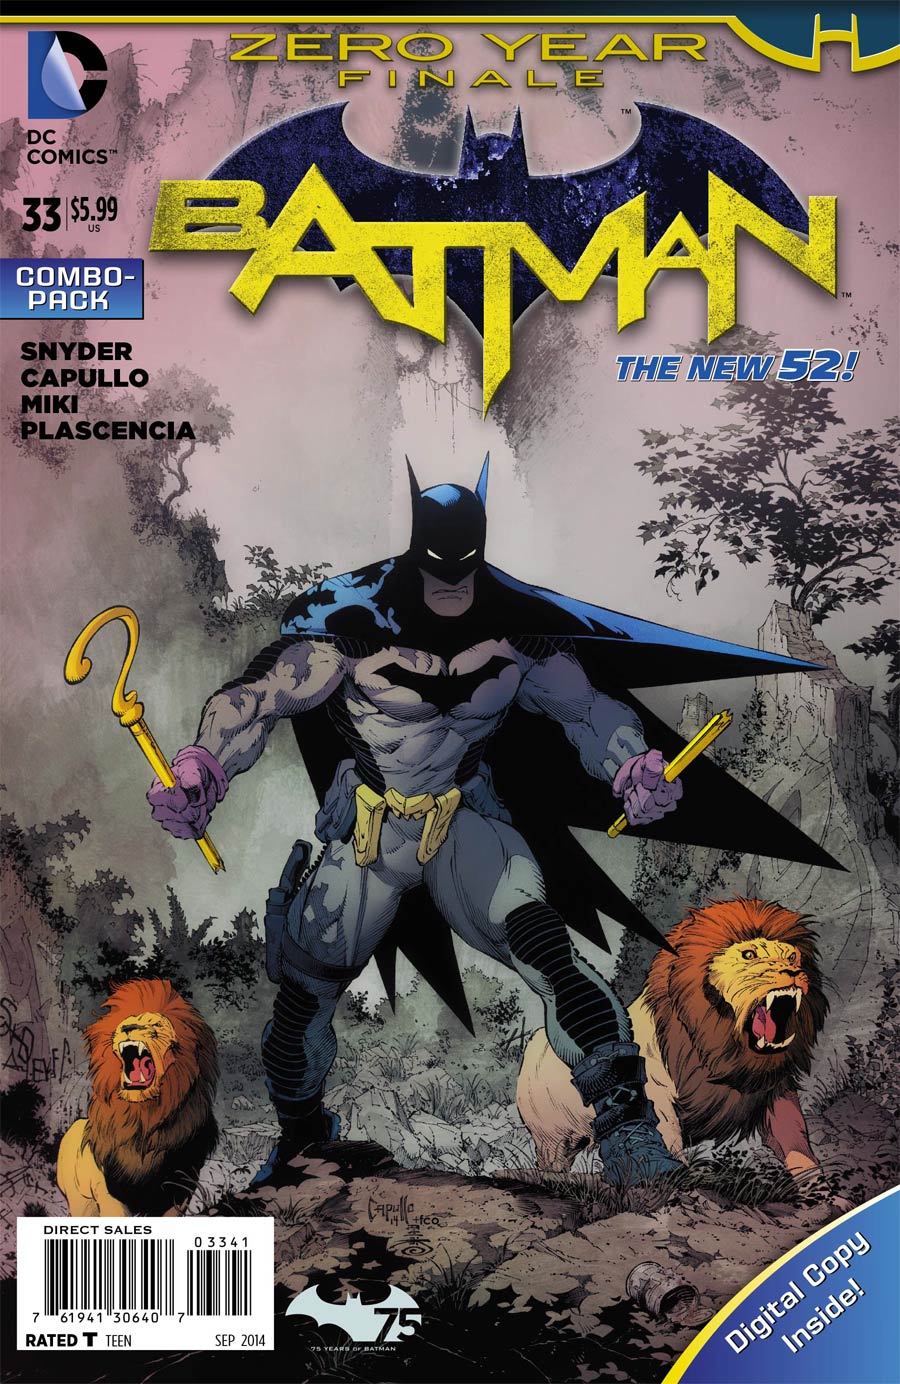 Batman Vol 2 #33 Cover D Combo Pack Without Polybag (Zero Year Tie-In)